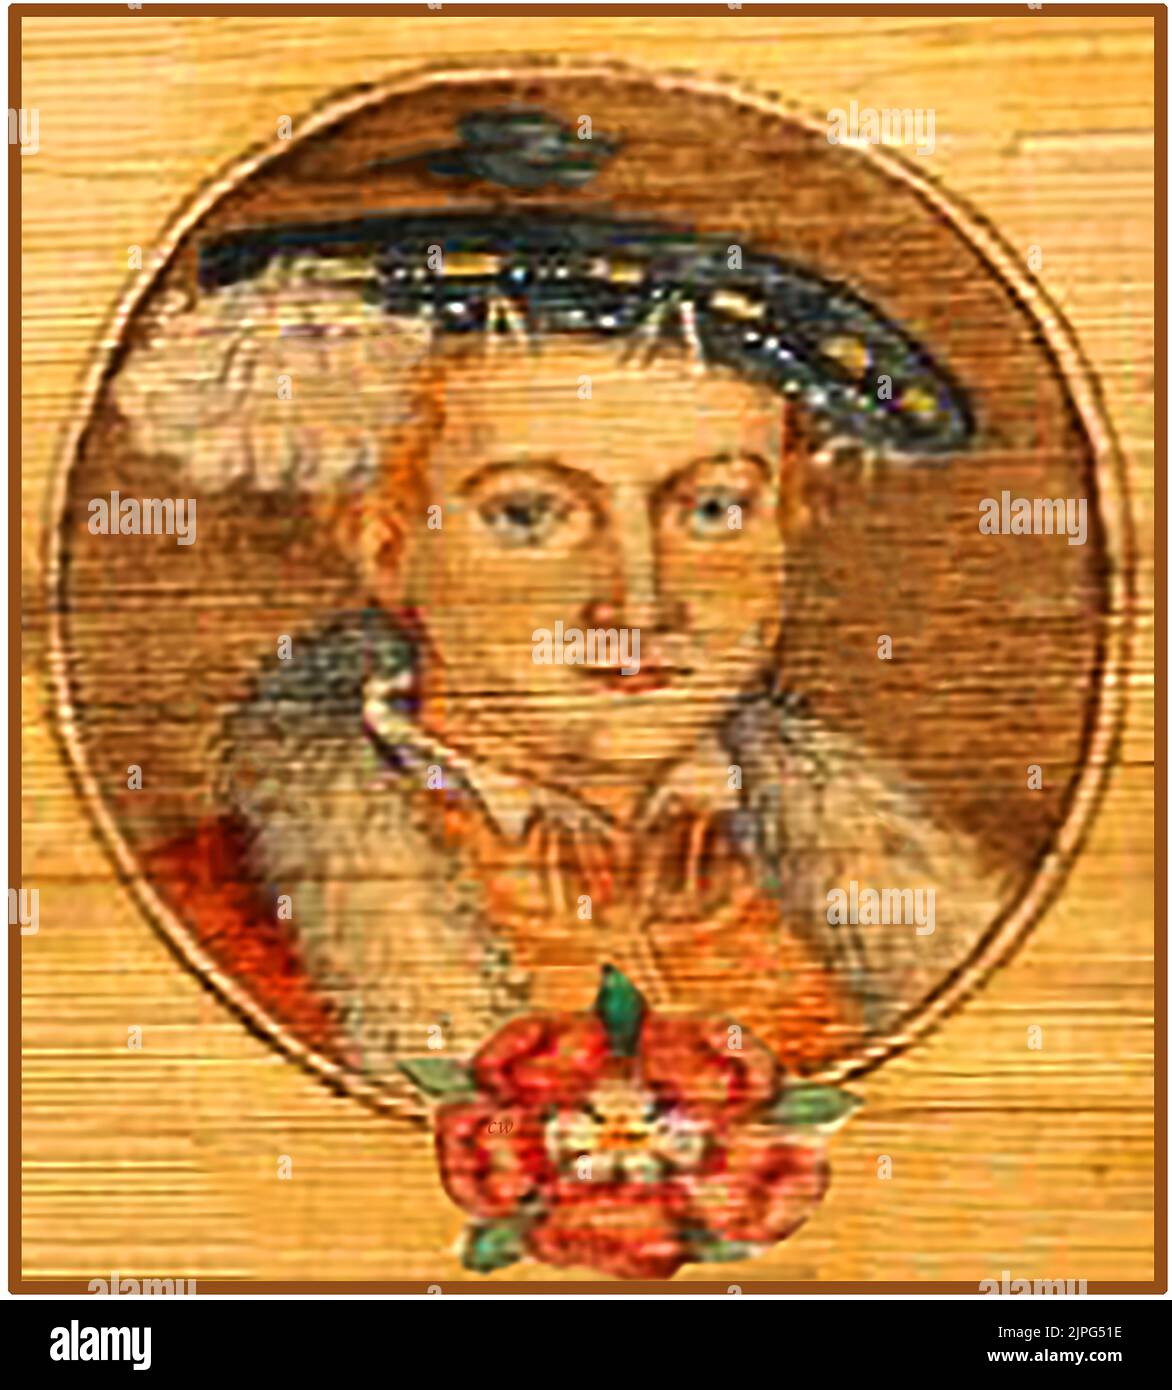 Am old  coloured portrait of King Edward VI of England   (1537 –  1553)  who was only 9 years old when crowned. He  was the son of Henry VIII and Jane Seymour and the first English monarch to be raised in the  Protestant faith. On his death, Lady Jane Grey was proclaimed Queen but she was executed for treason after only  9 days on the throne in what was seen by many to be a political execution. He died aged 15  and named Lady Jane Grey as his successor . Stock Photo